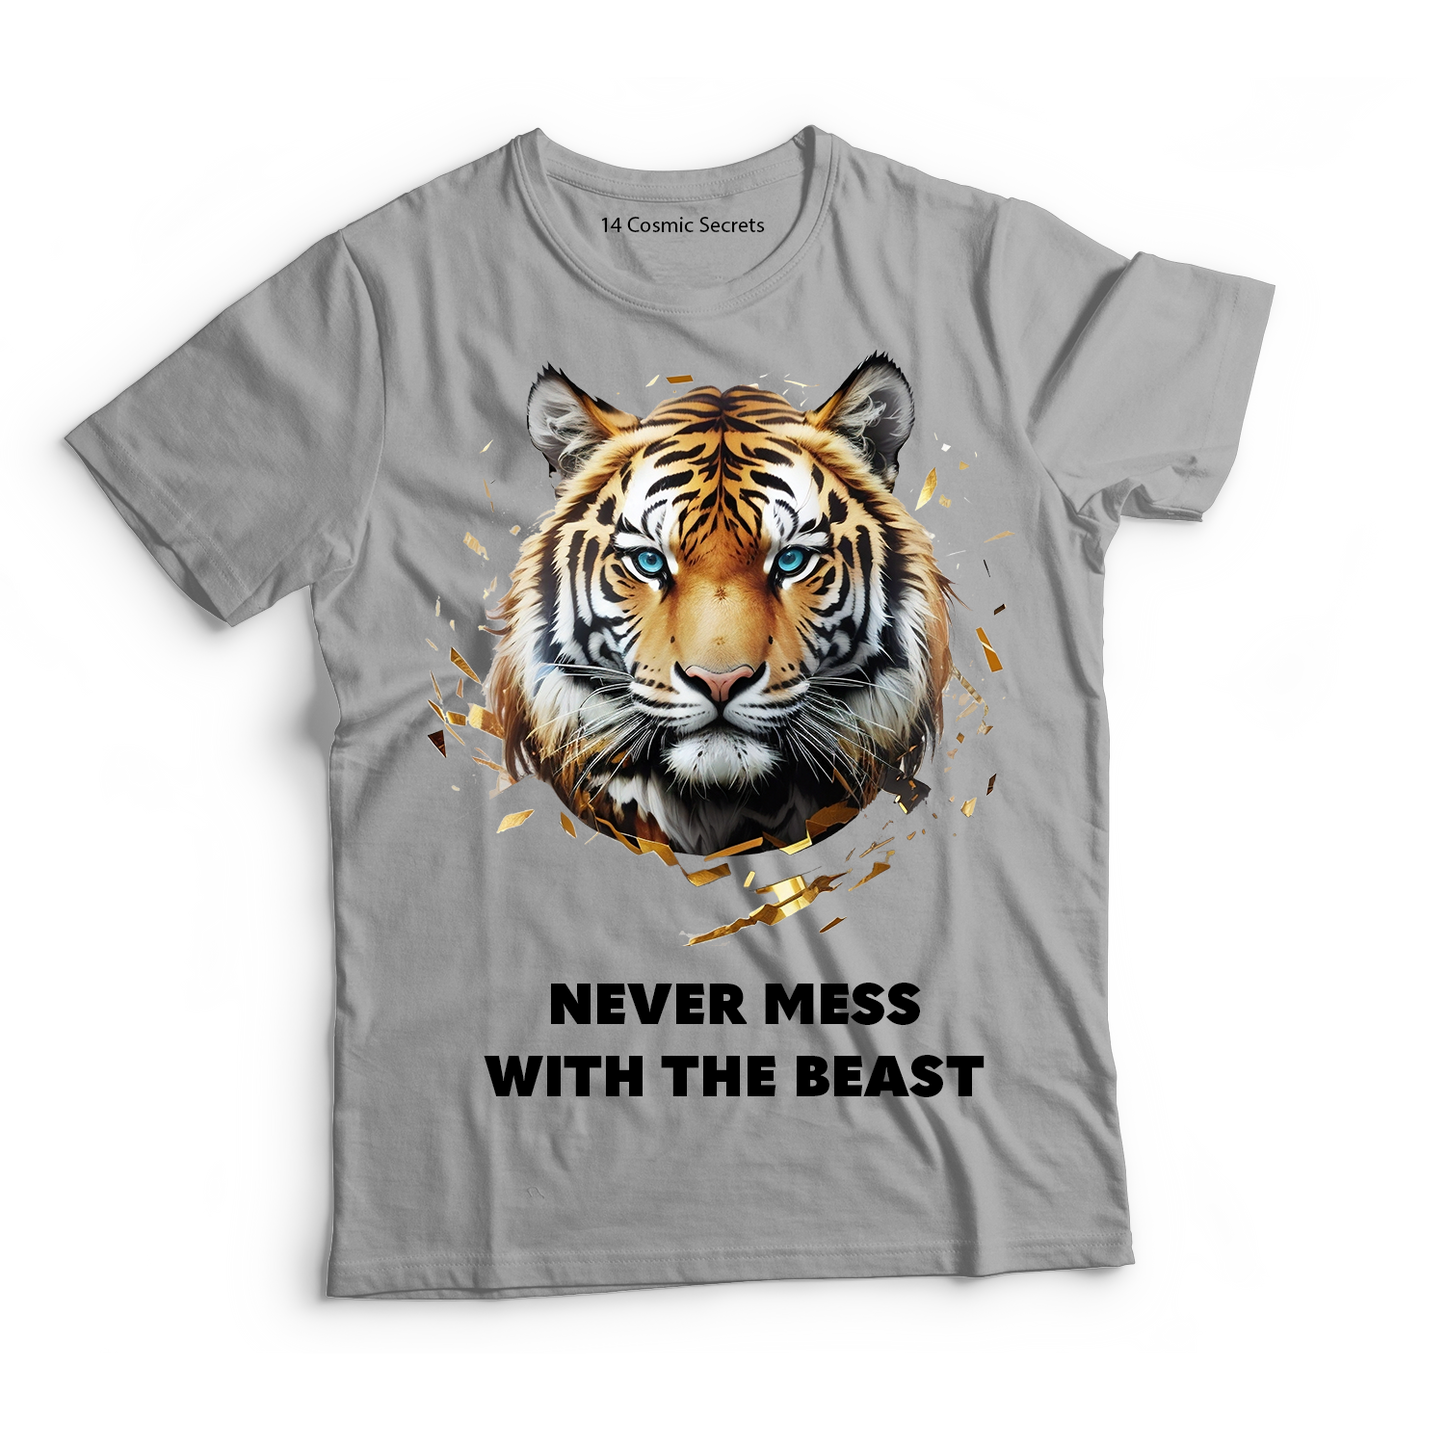 Never Mess with the Beast Graphic Printed T-Shirt  Cotton T-Shirt Magnificence of India T-Shirt